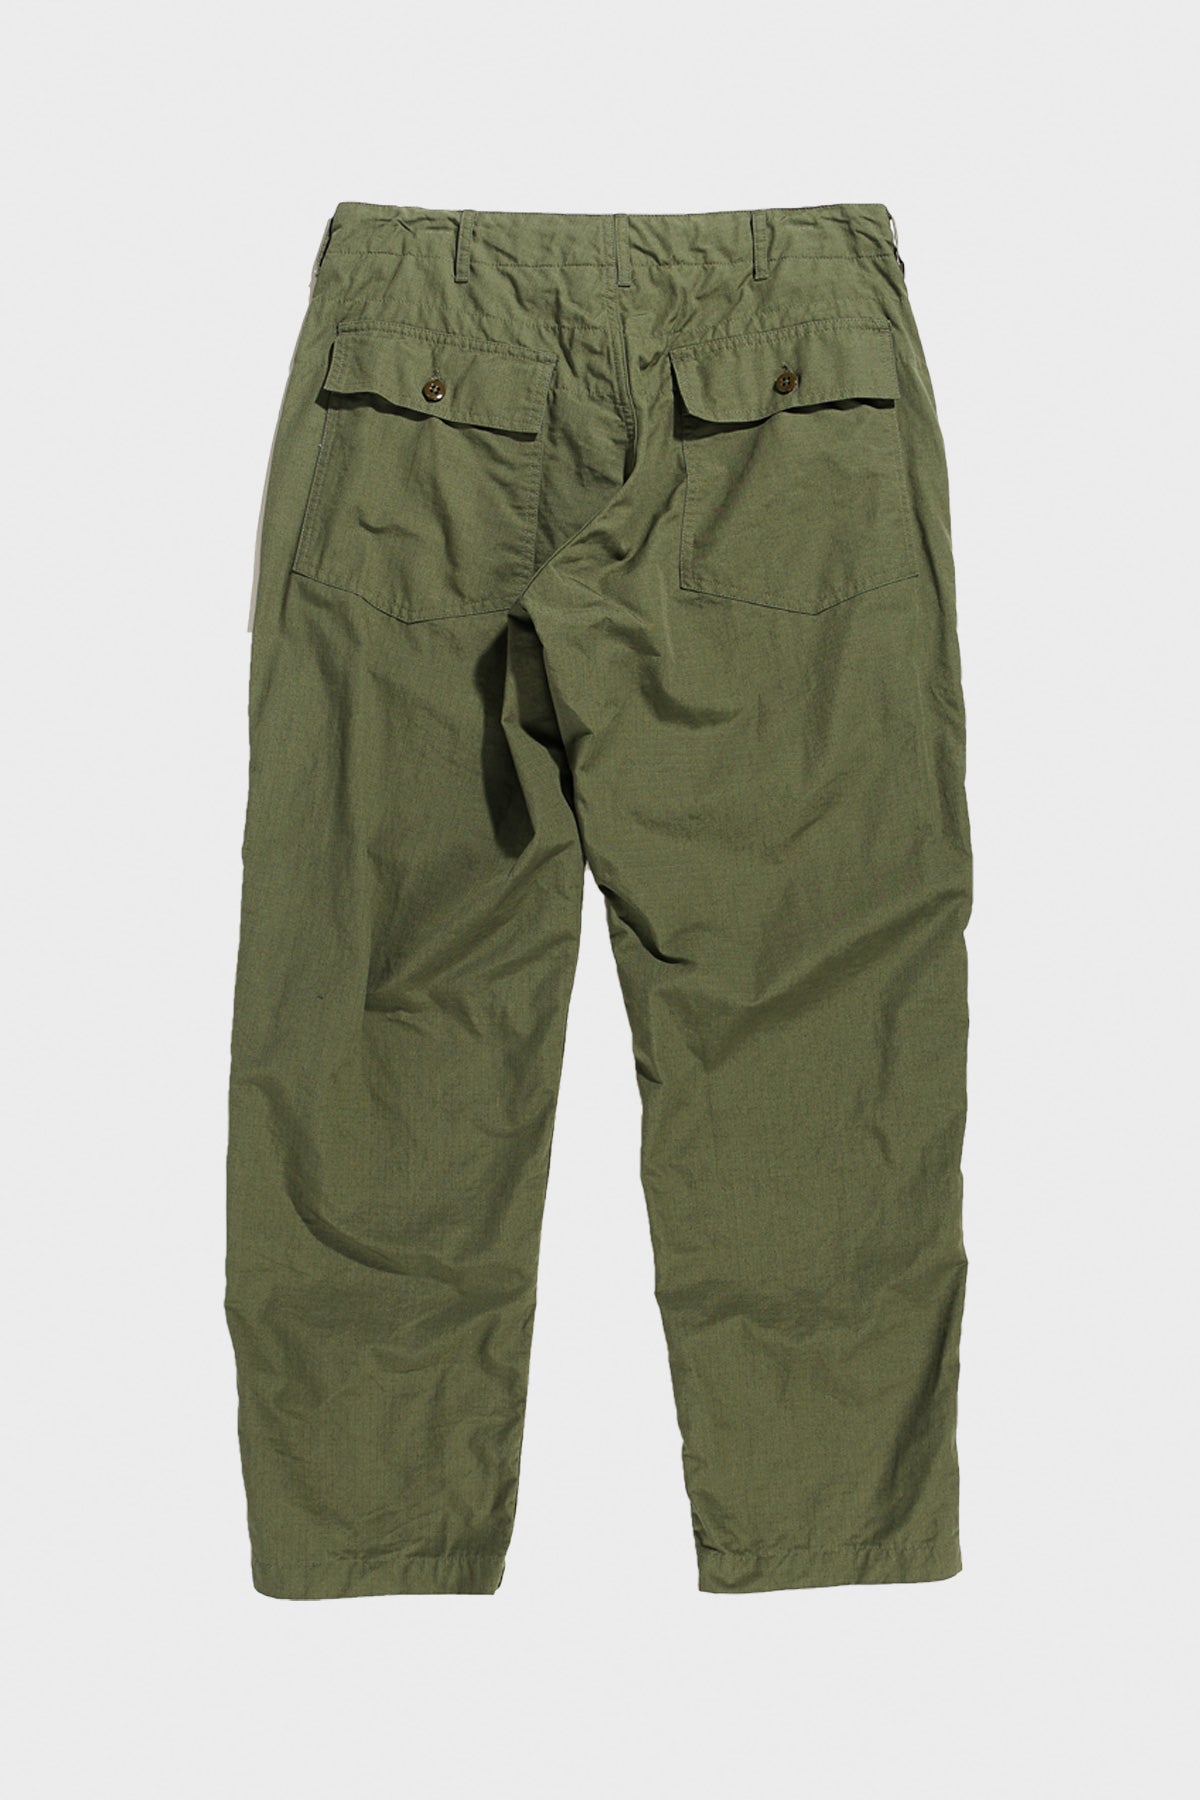 Engineered Garments Fatigue Pant | Olive Cotton Ripstop | Canoe Club